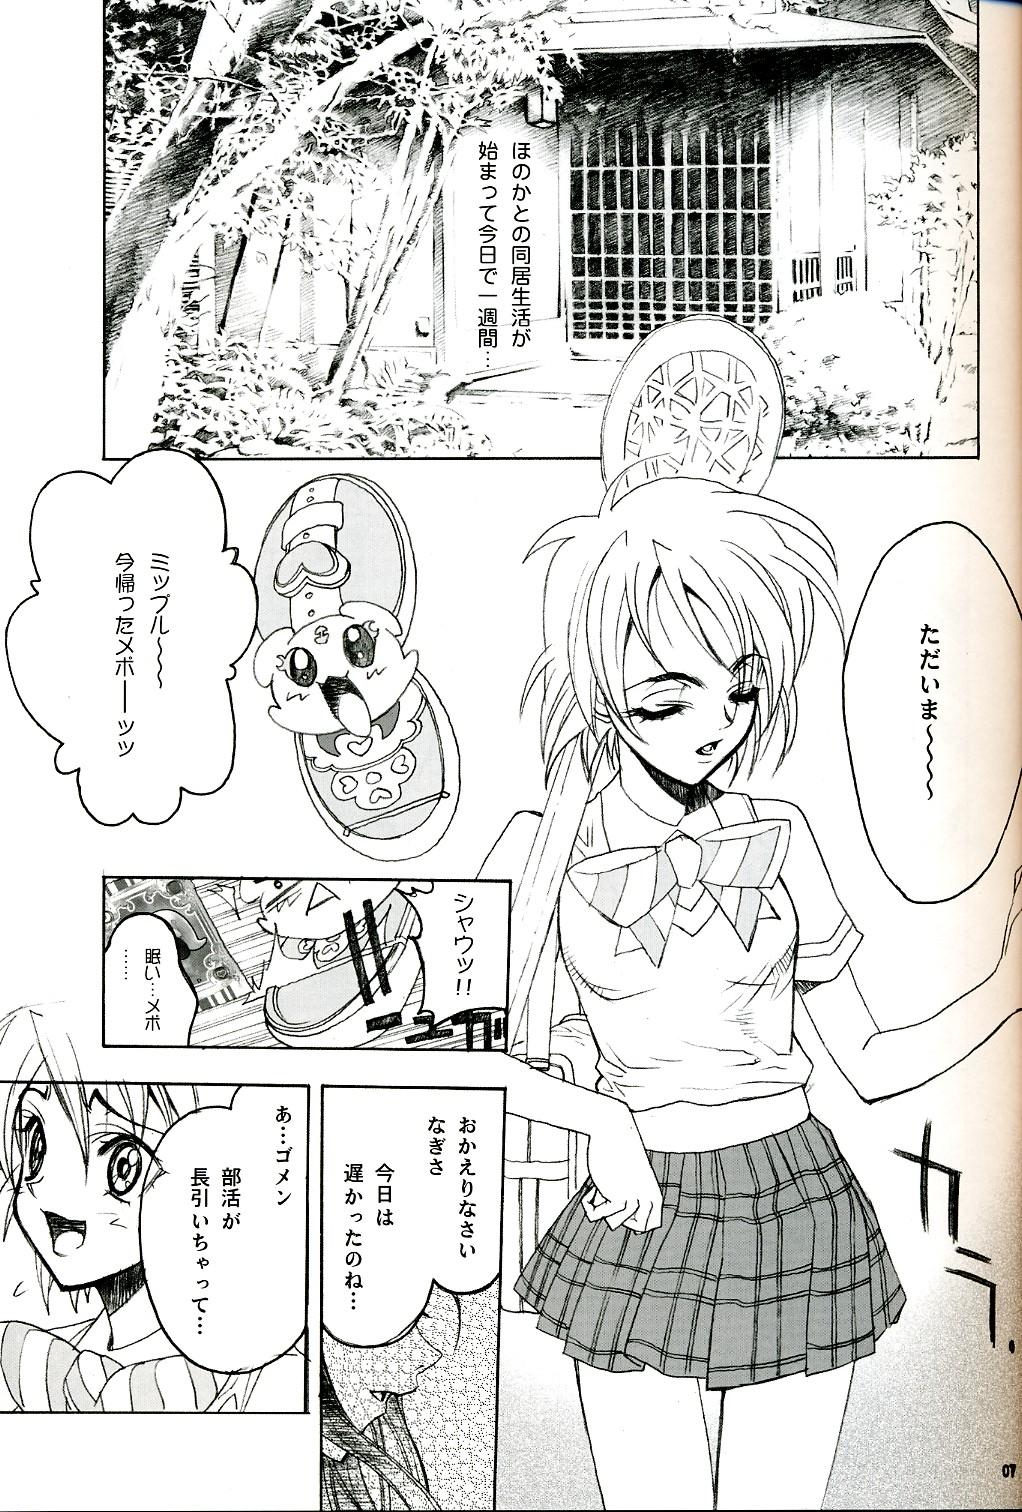 Best Blowjobs SOS ROMANTIC - Pretty cure Older - Page 6